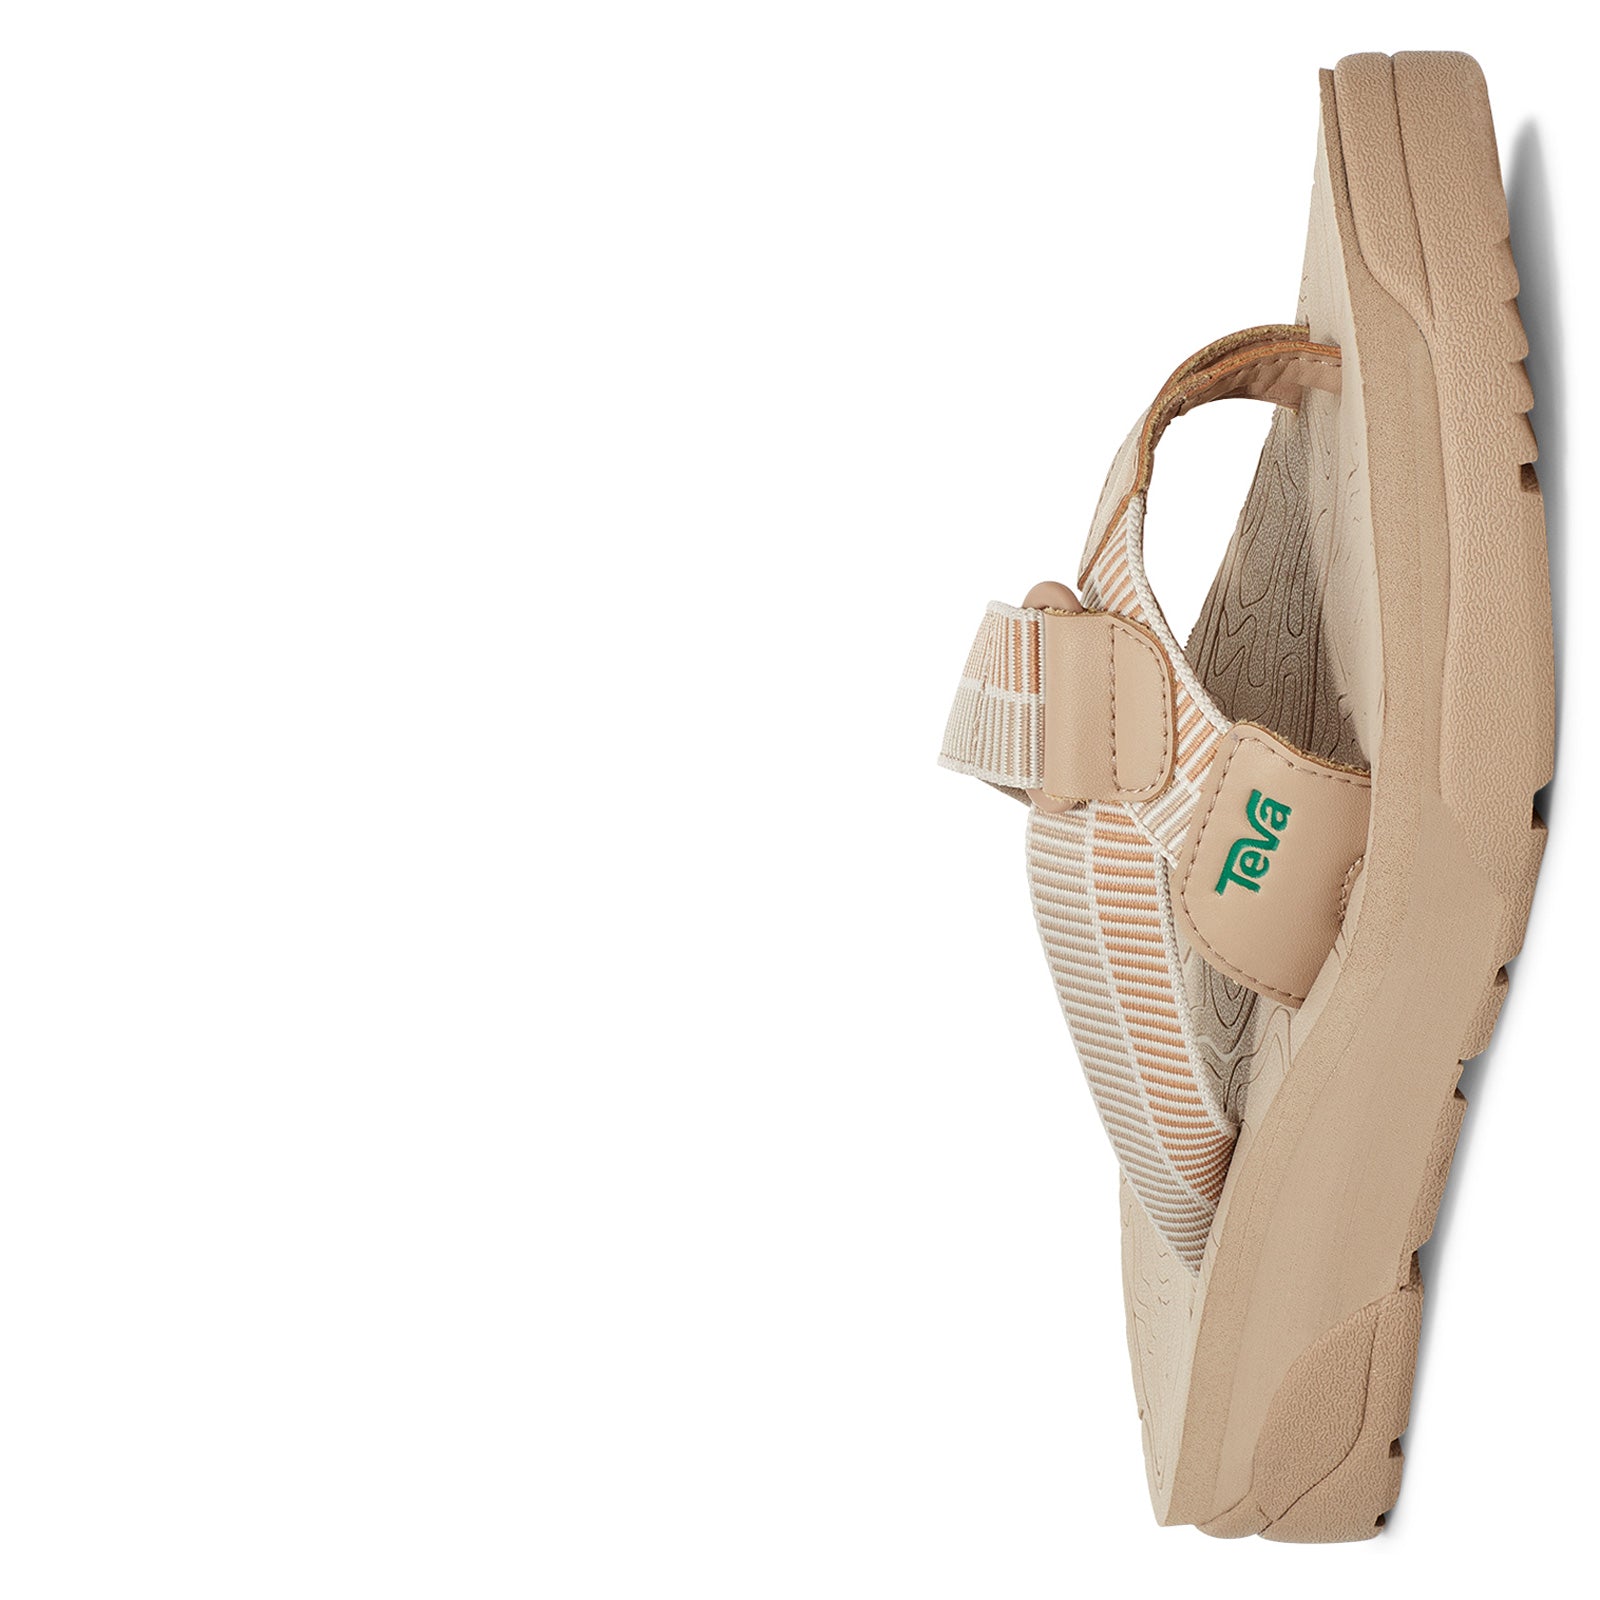 Top more than 160 teva sandals clearance sale latest